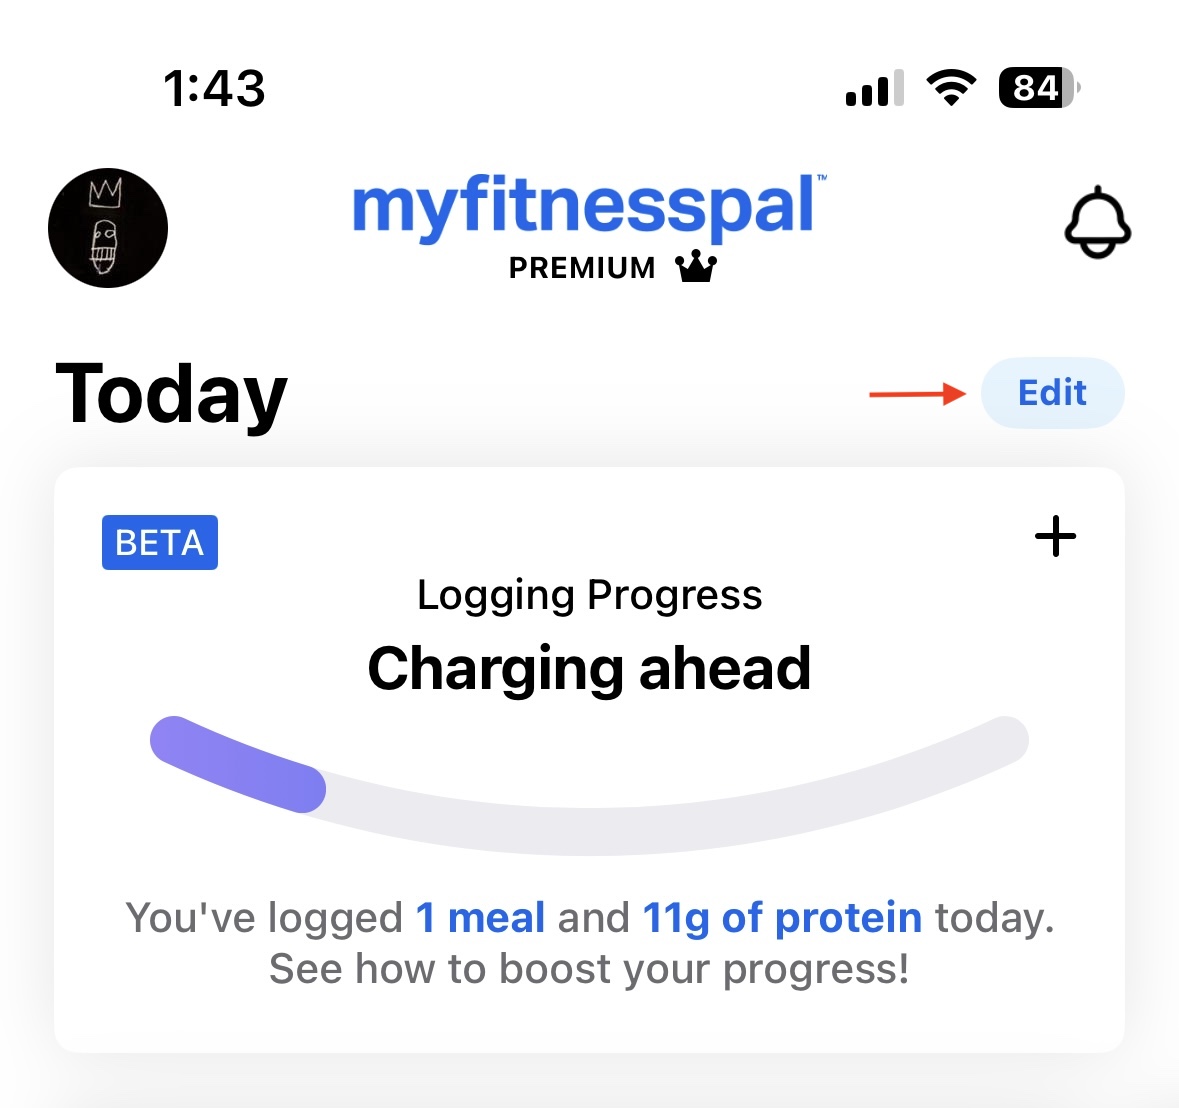 How do I record my weight and other measurements? – MyFitnessPal Help